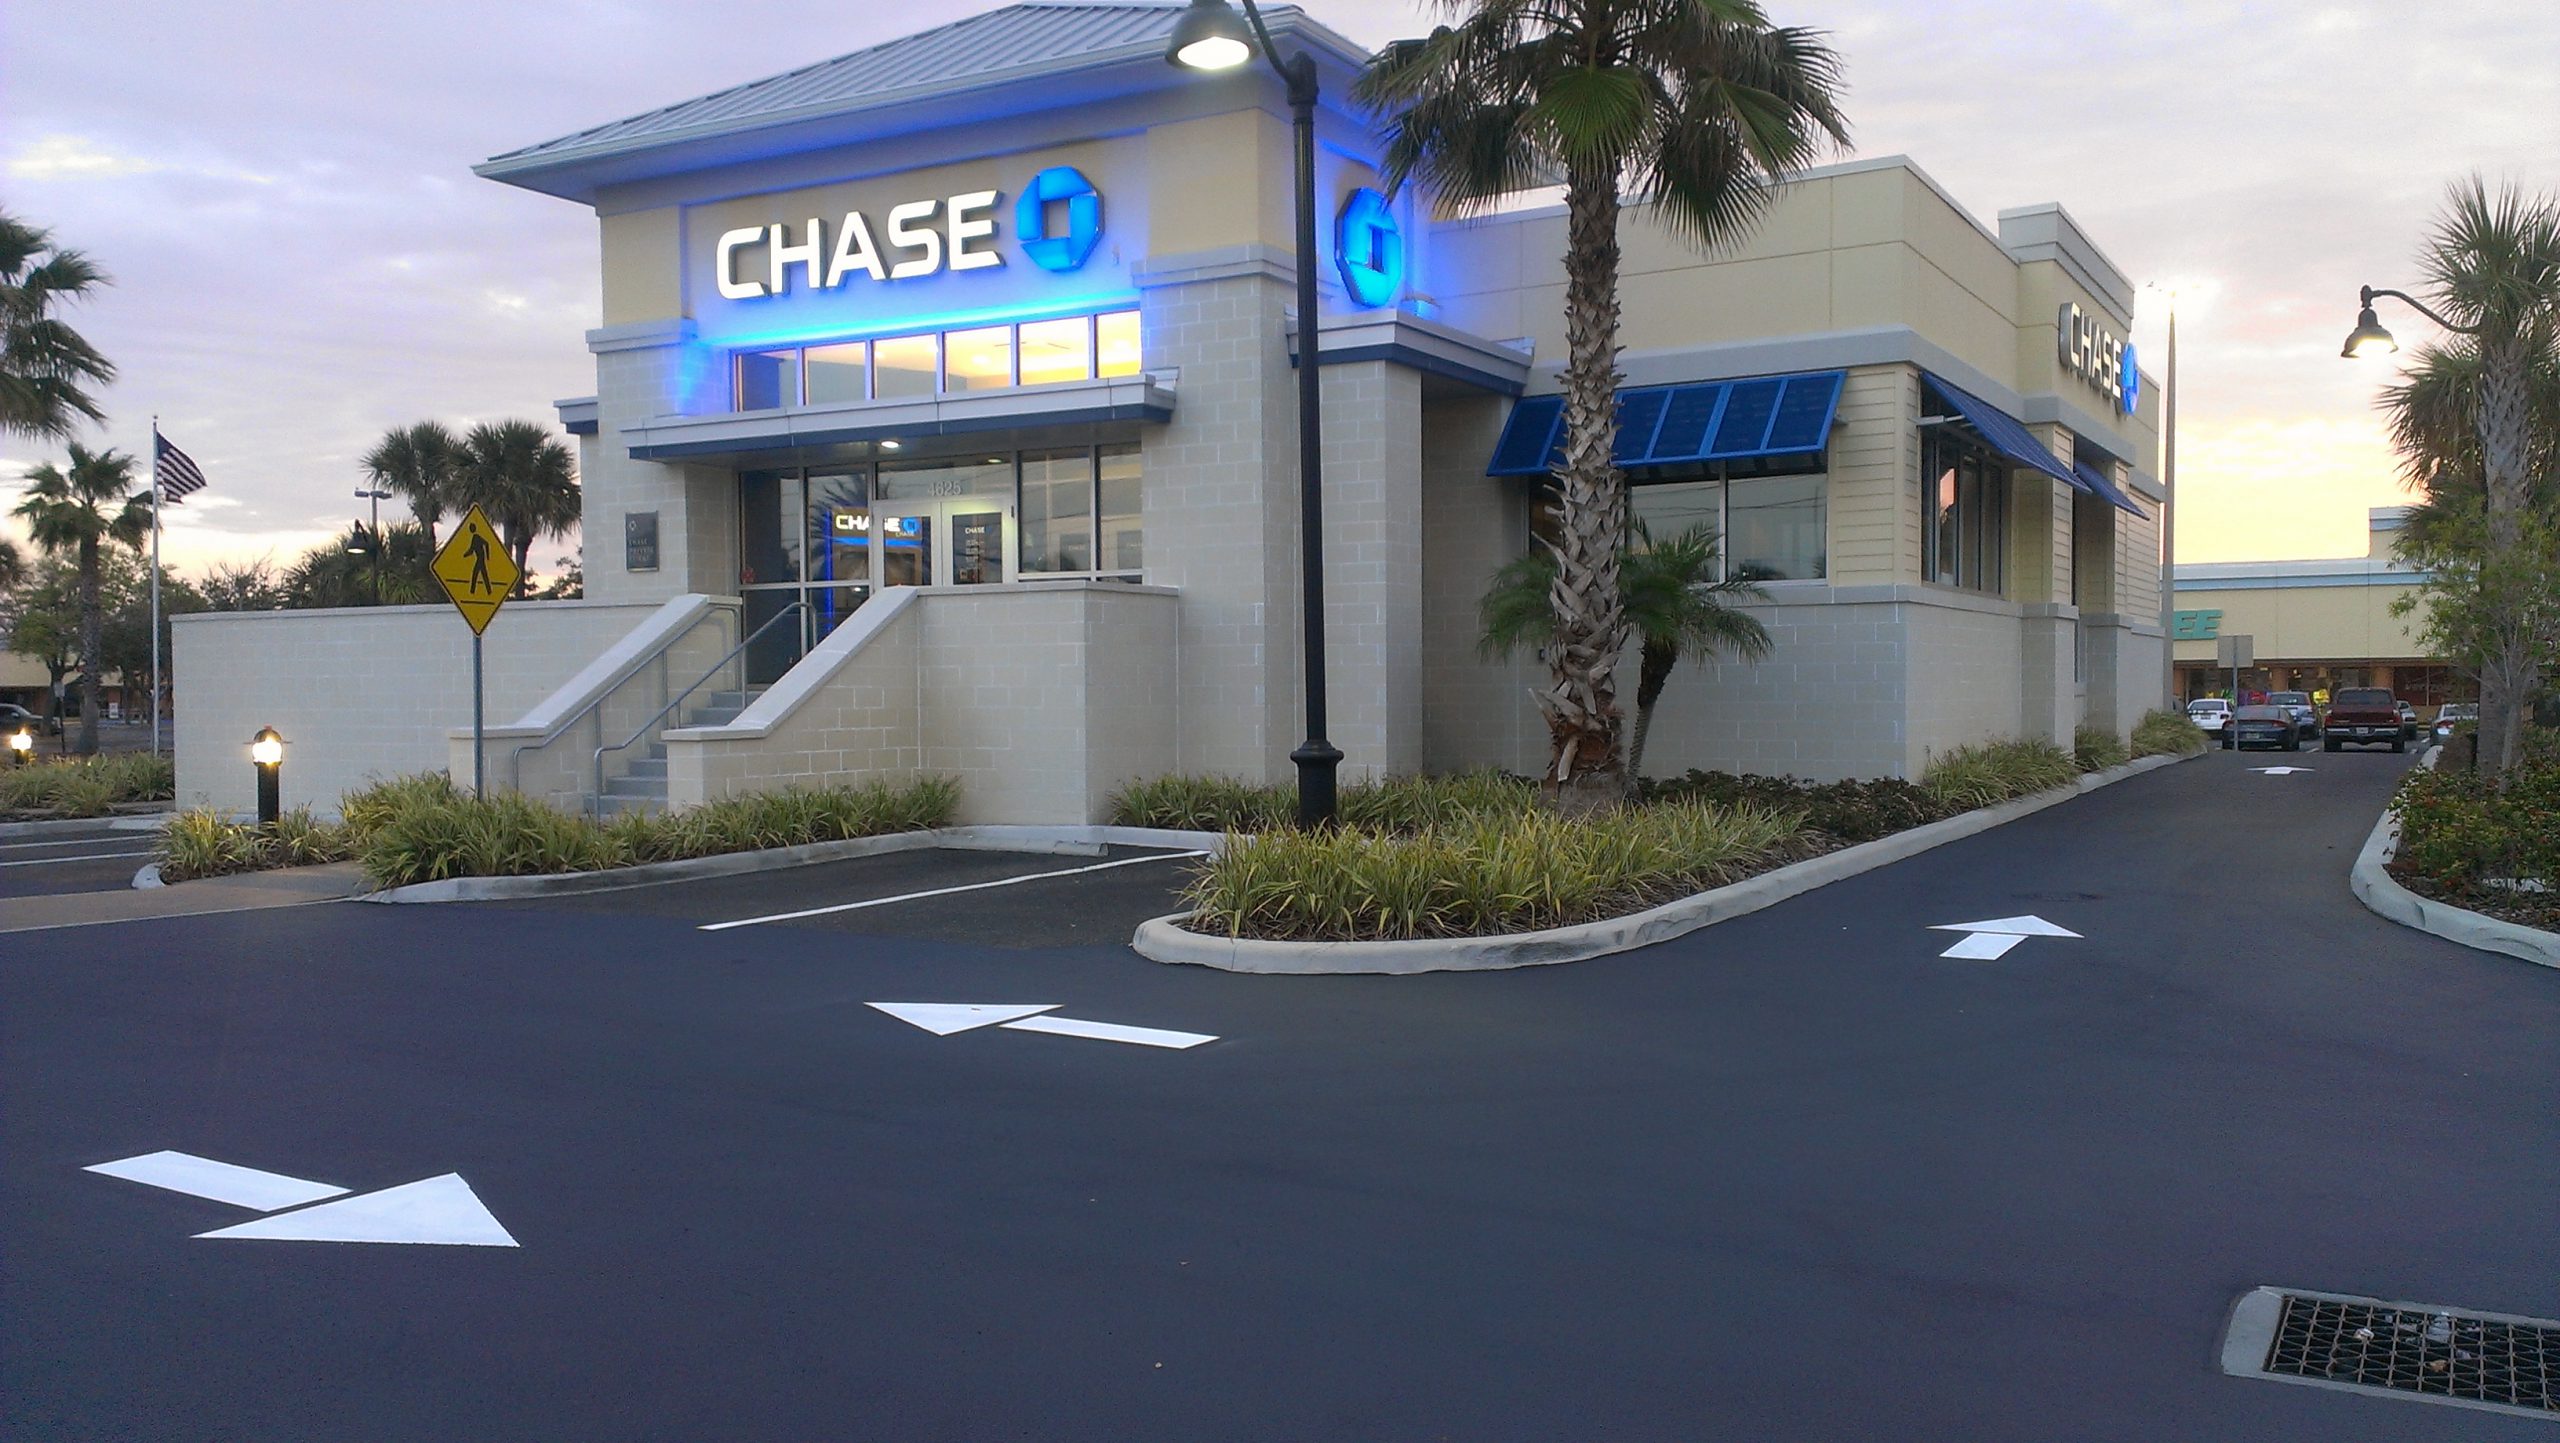 The Parking Lot of Chase After Marking